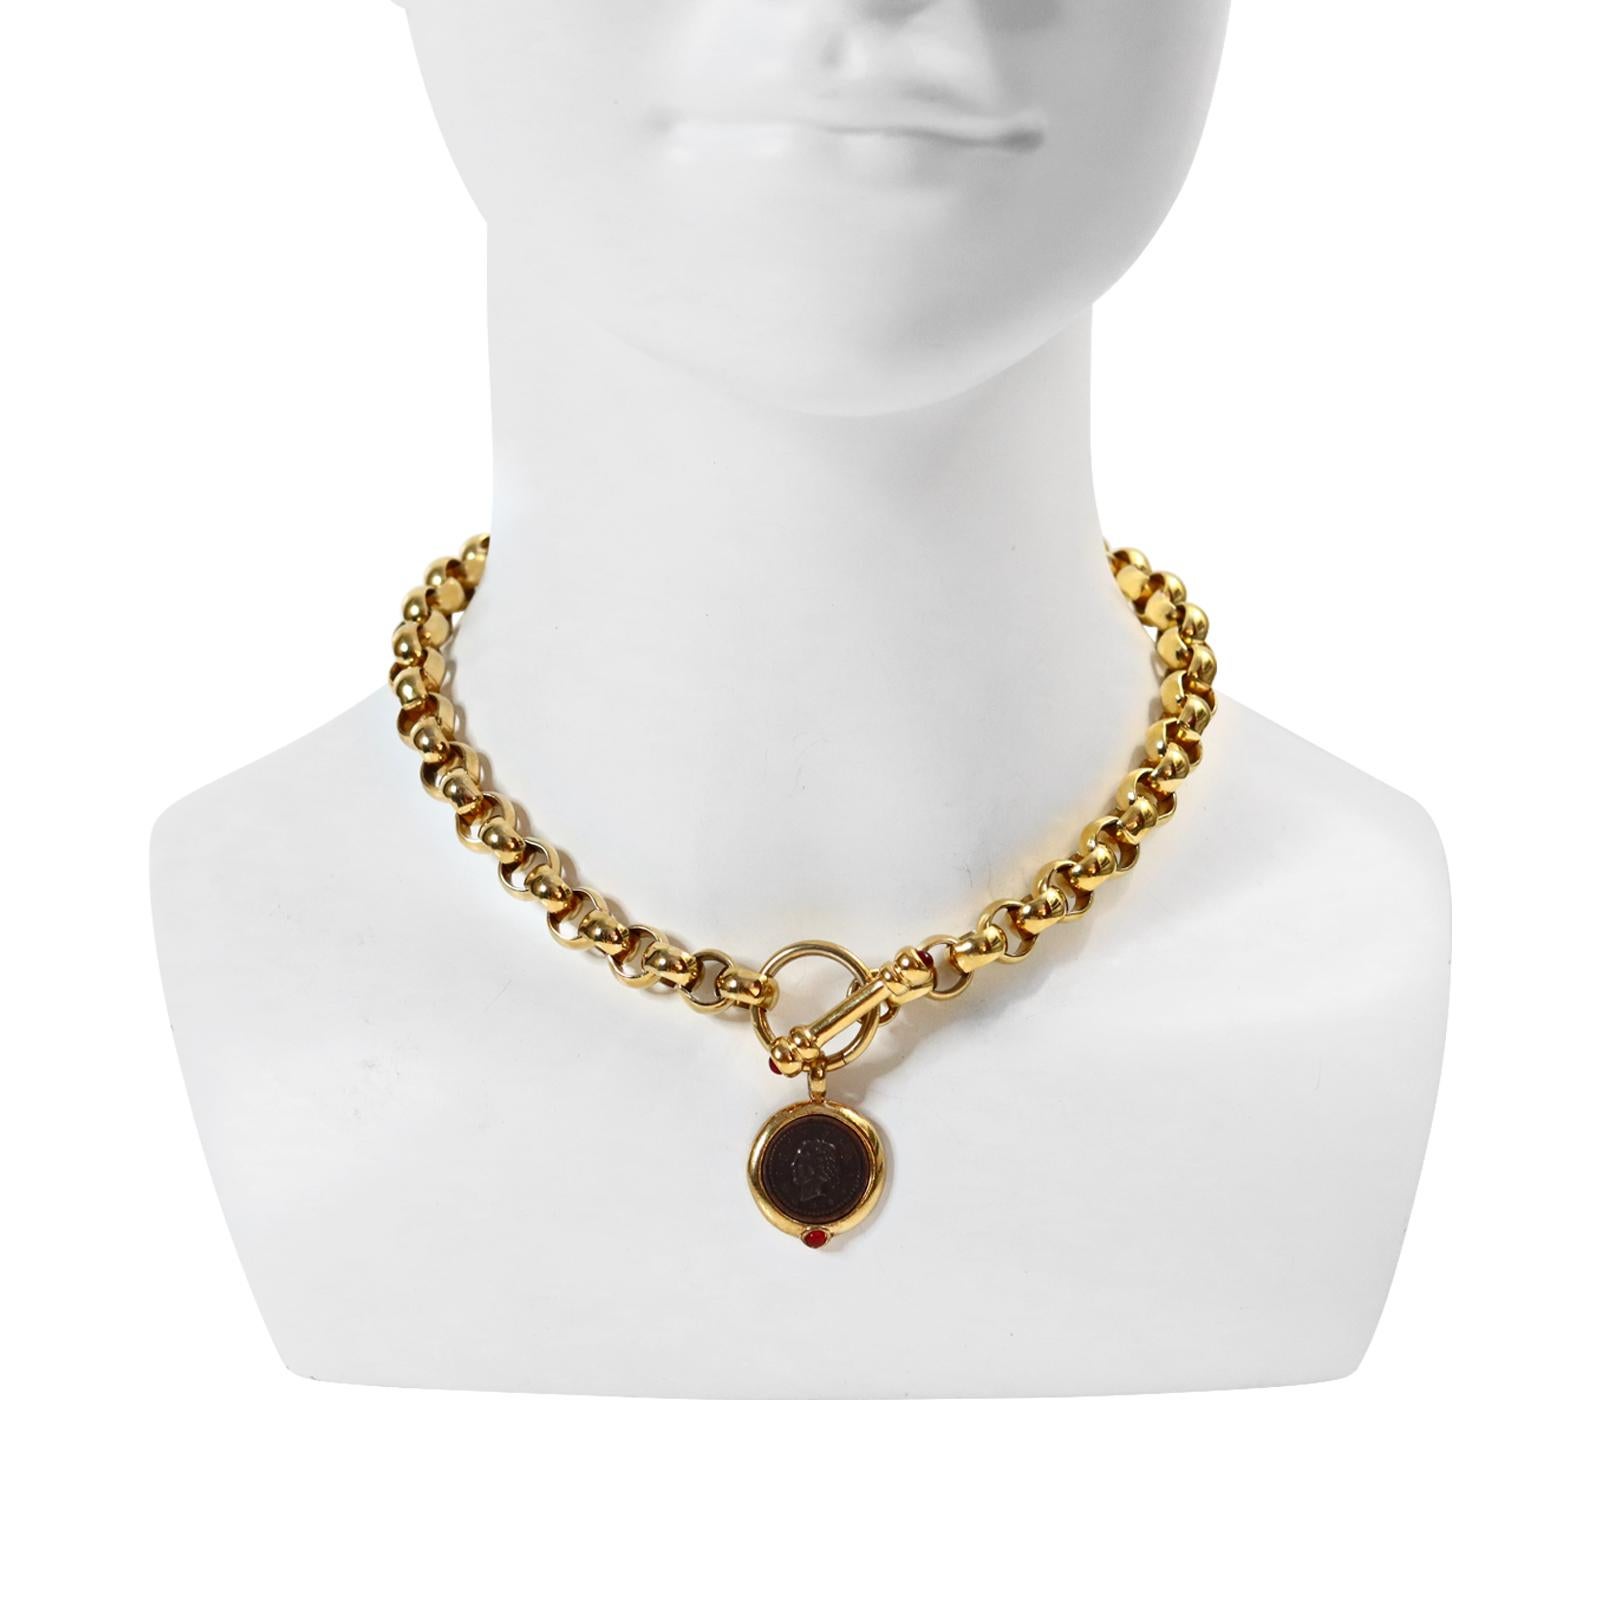 Vintage Gold Rollo Chain with Toggle and Dangling Coin Necklace, circa 1990s For Sale 1